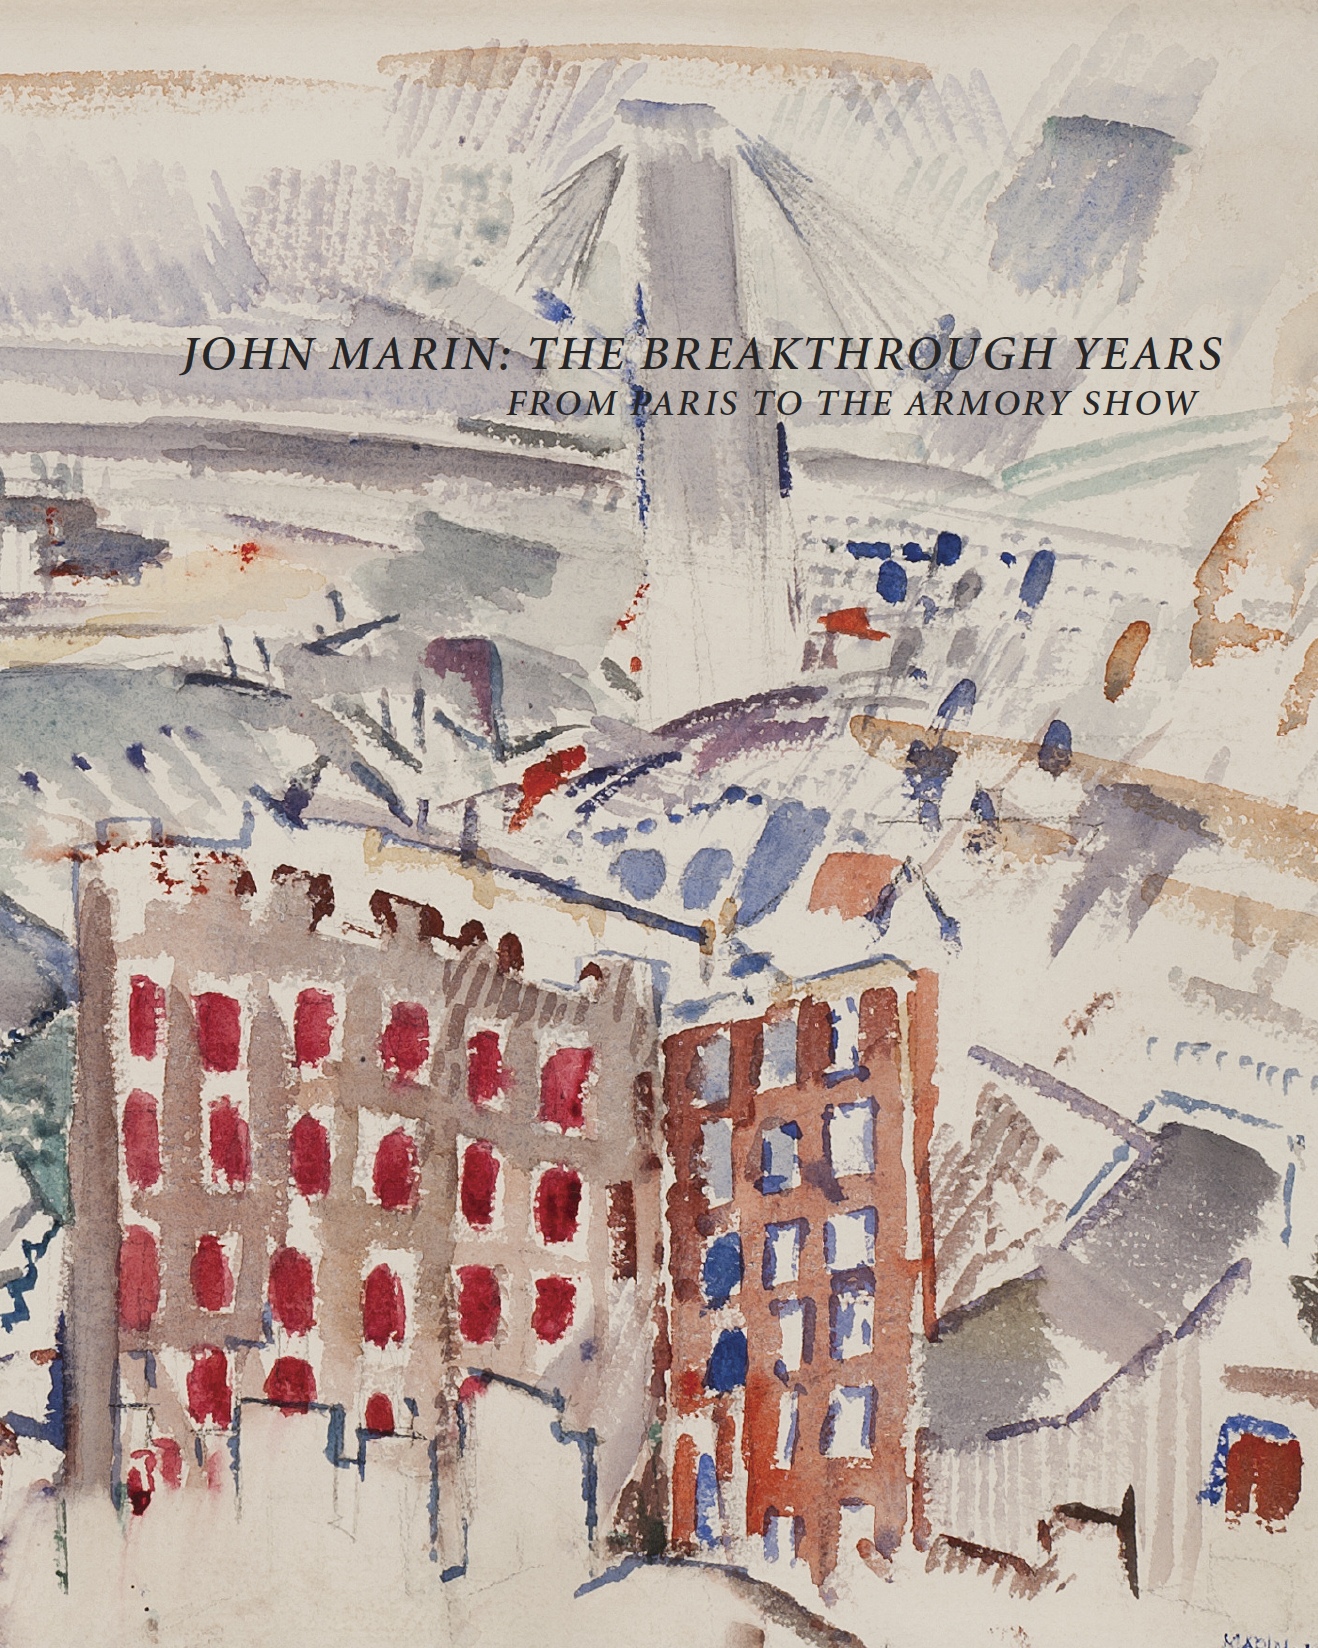 John Marin: # The Breakthrough Years — # From Paris to the Armory Show # 2013 &lt;alt="Catalogue cover with title over watercolor city scape with a large red building."&gt; 